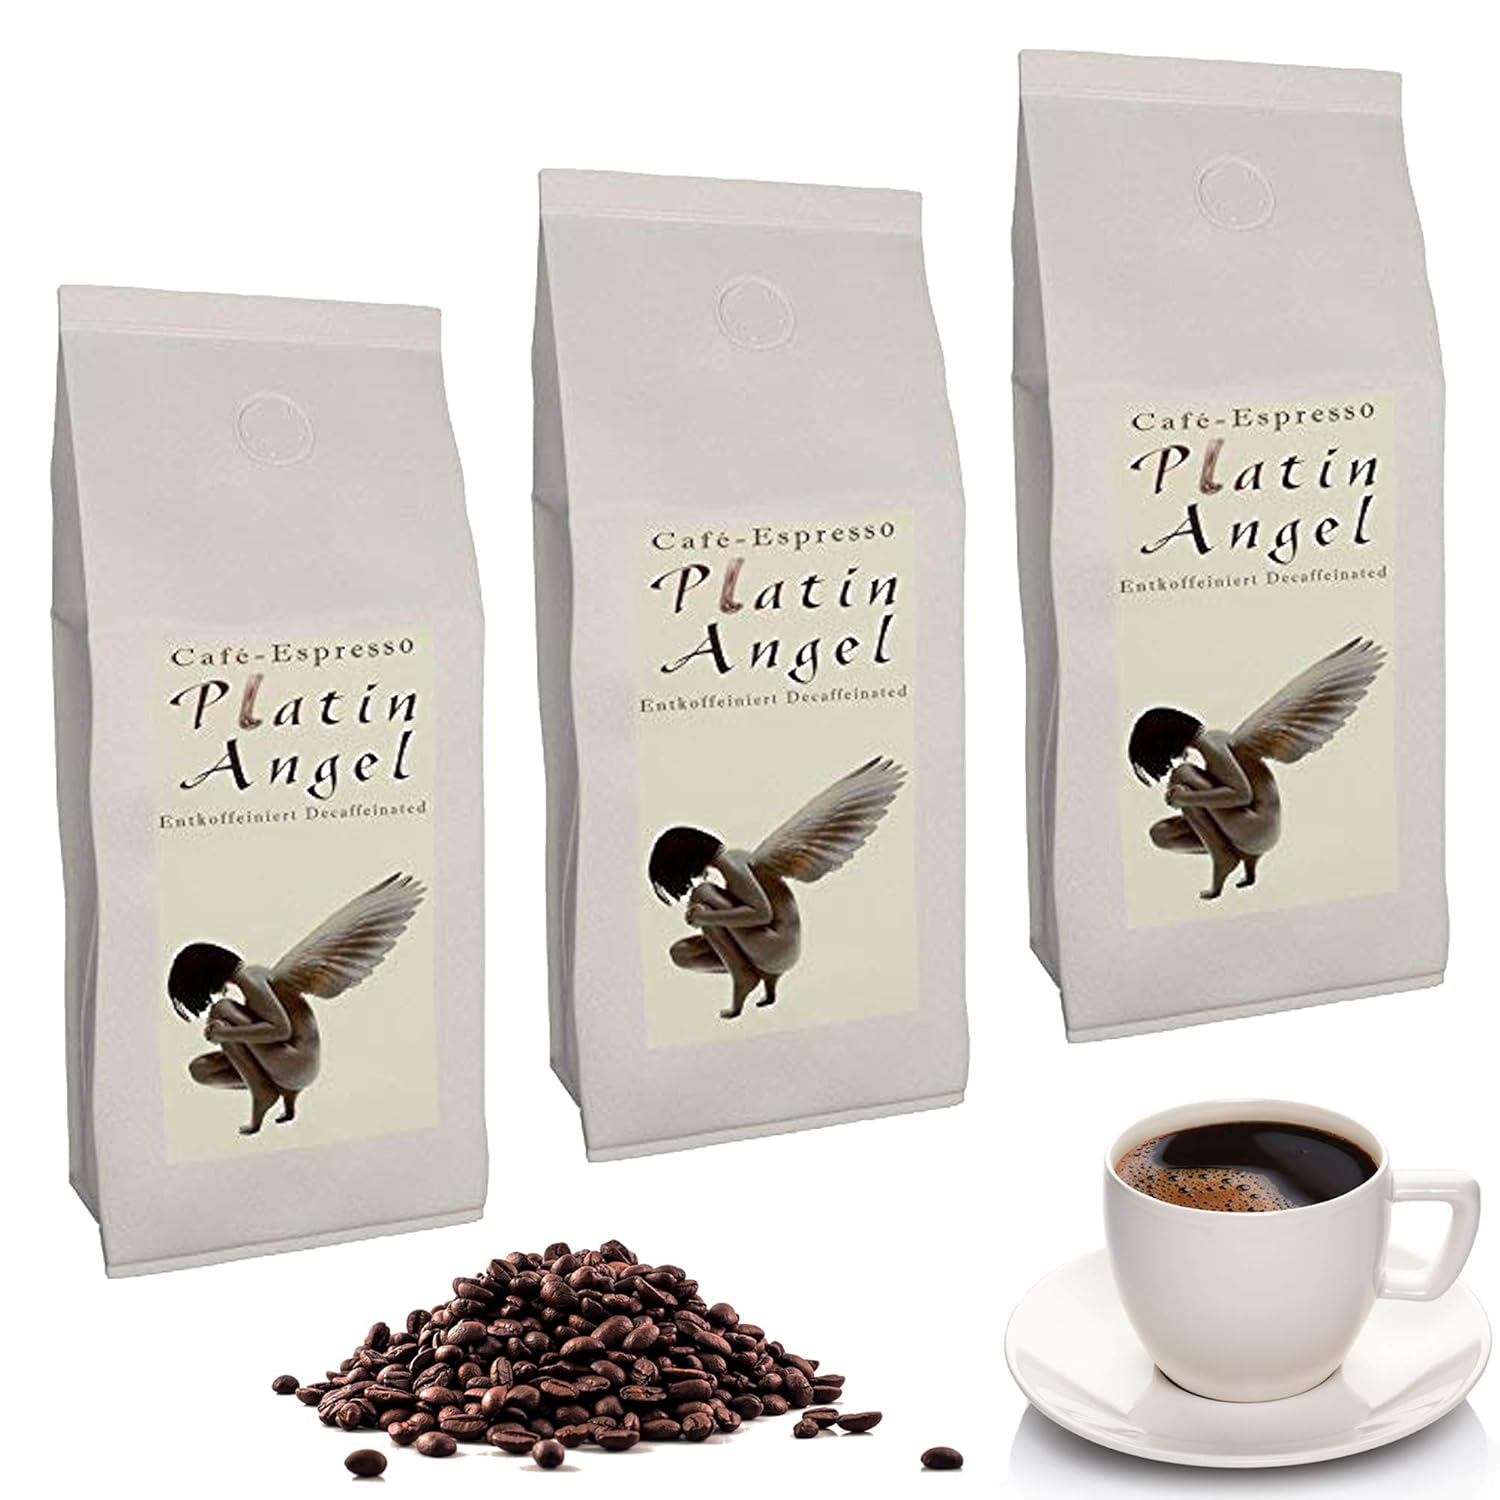 C&T Platin Angel Espresso Decaf 3 x 1000 g Whole coffee beans - the decaffeinated - caffeinated top coffee from our popular espresso angel series